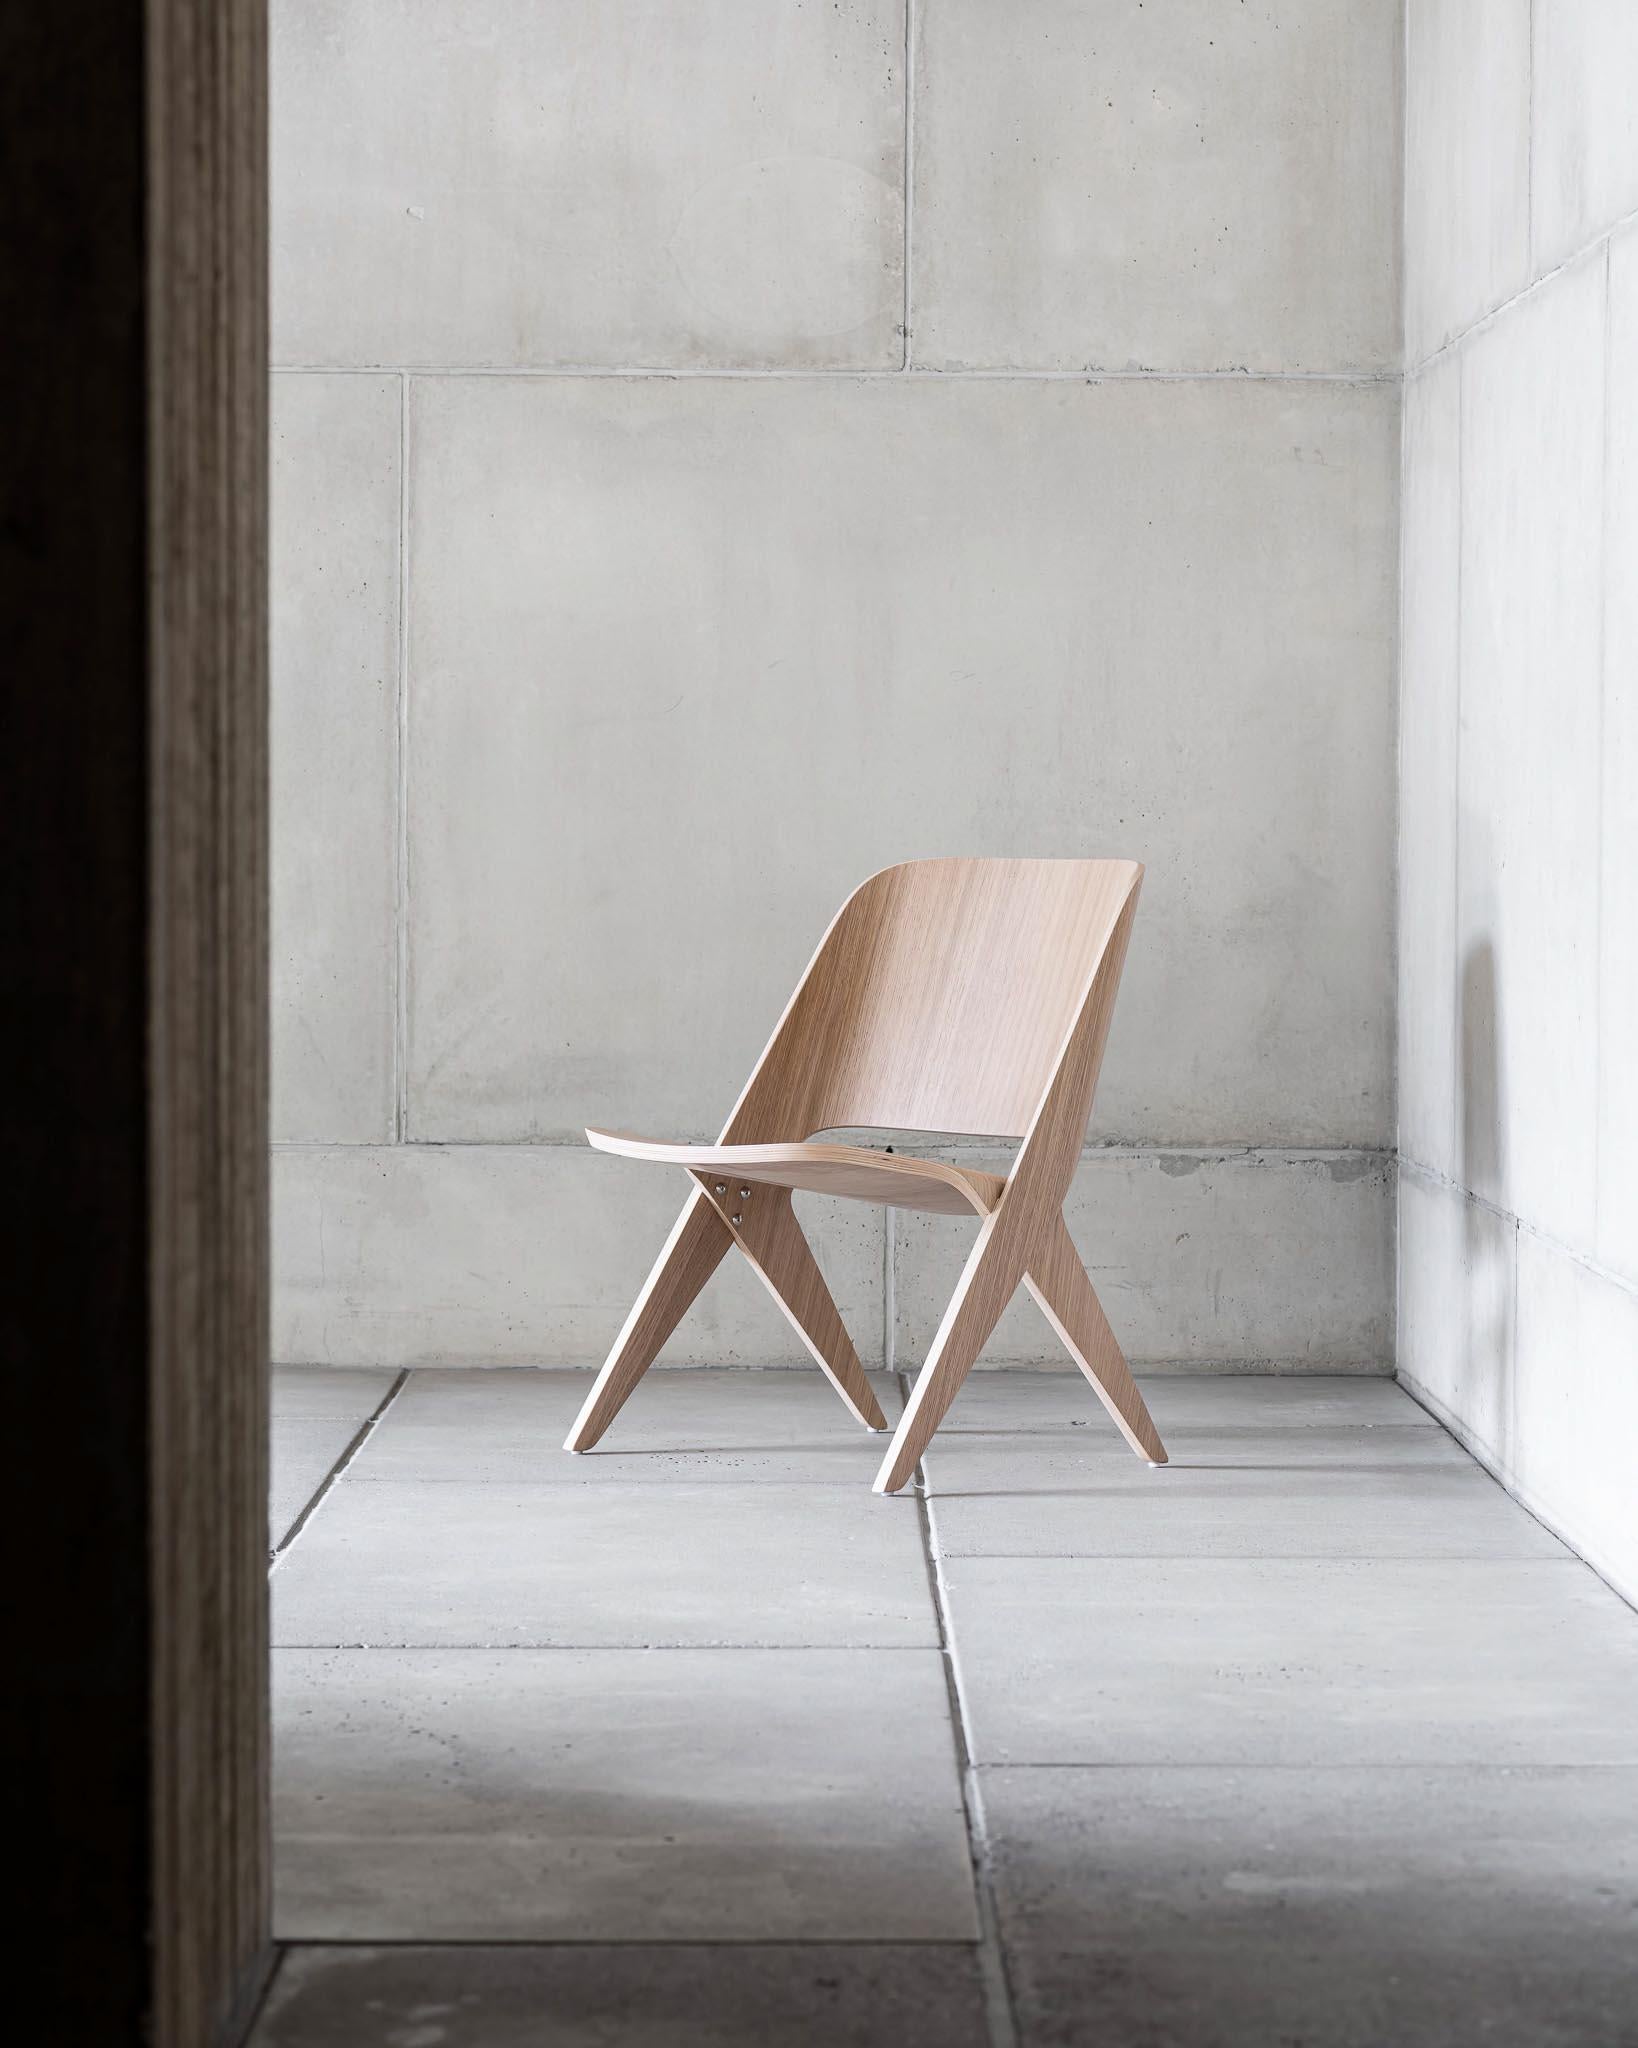 Lavitta Lounge Chair by Poiat 
Designers: Timo Mikkonen & Antti Rouhunkoski
Collection Lavitta 2020

Model shown: Wood stain - Dark Oak 
Dimensions: D. 61 x W. 68 x H. 73 

The Lavitta Chair is a modern classic that focuses on the